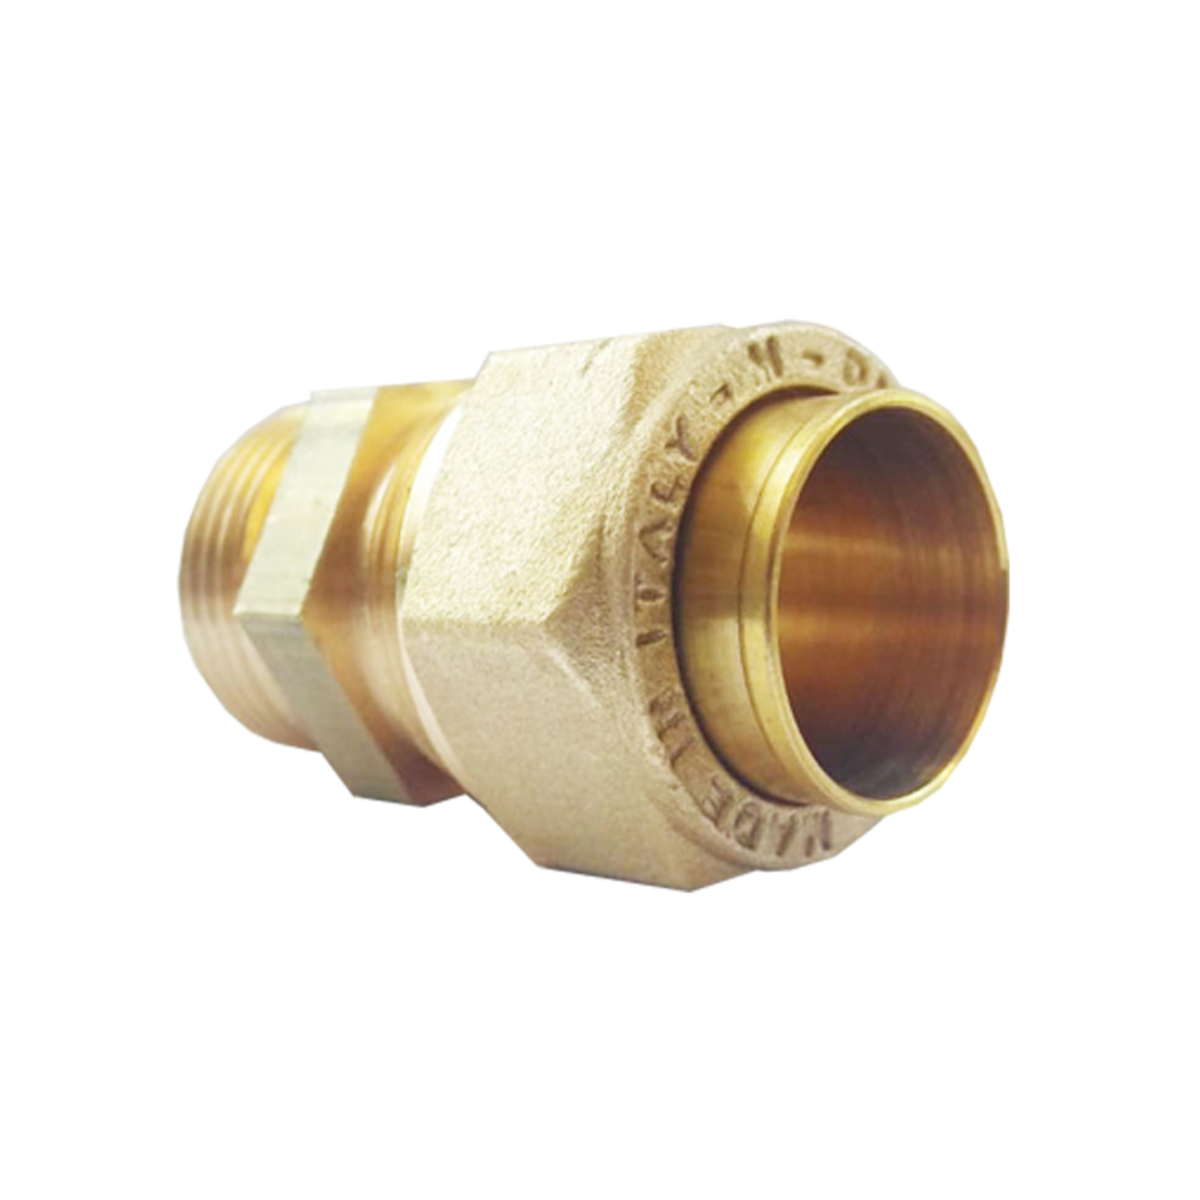 Austroflex Easy Tight FX push-in fitting Ø 20 threaded connection 3/4 M